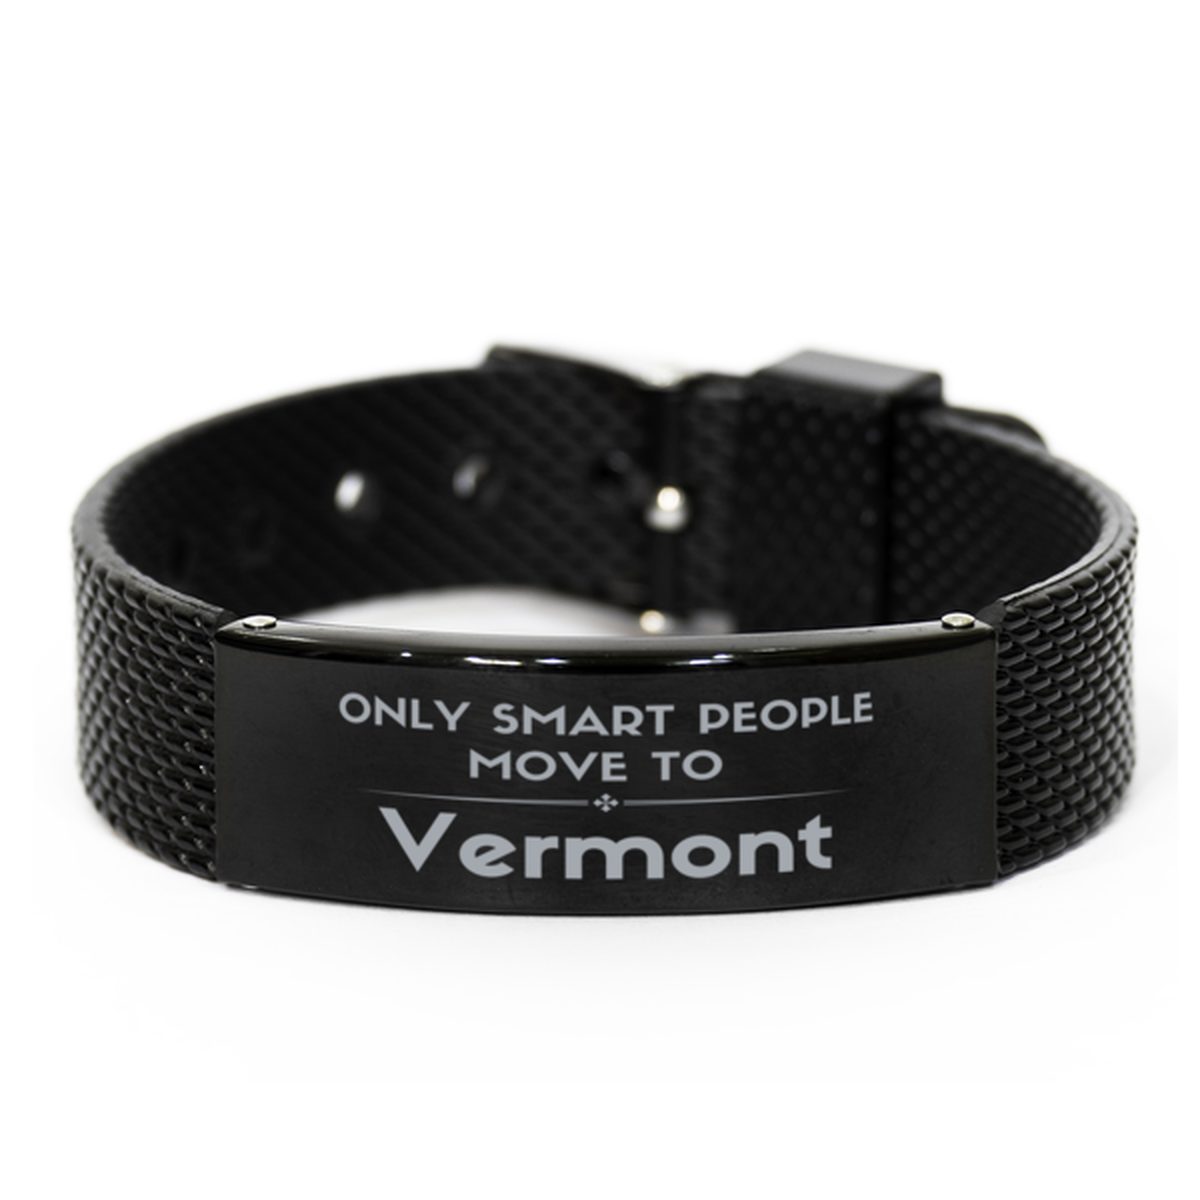 Only smart people move to Vermont Black Shark Mesh Bracelet, Gag Gifts For Vermont, Move to Vermont Gifts for Friends Coworker Funny Saying Quote